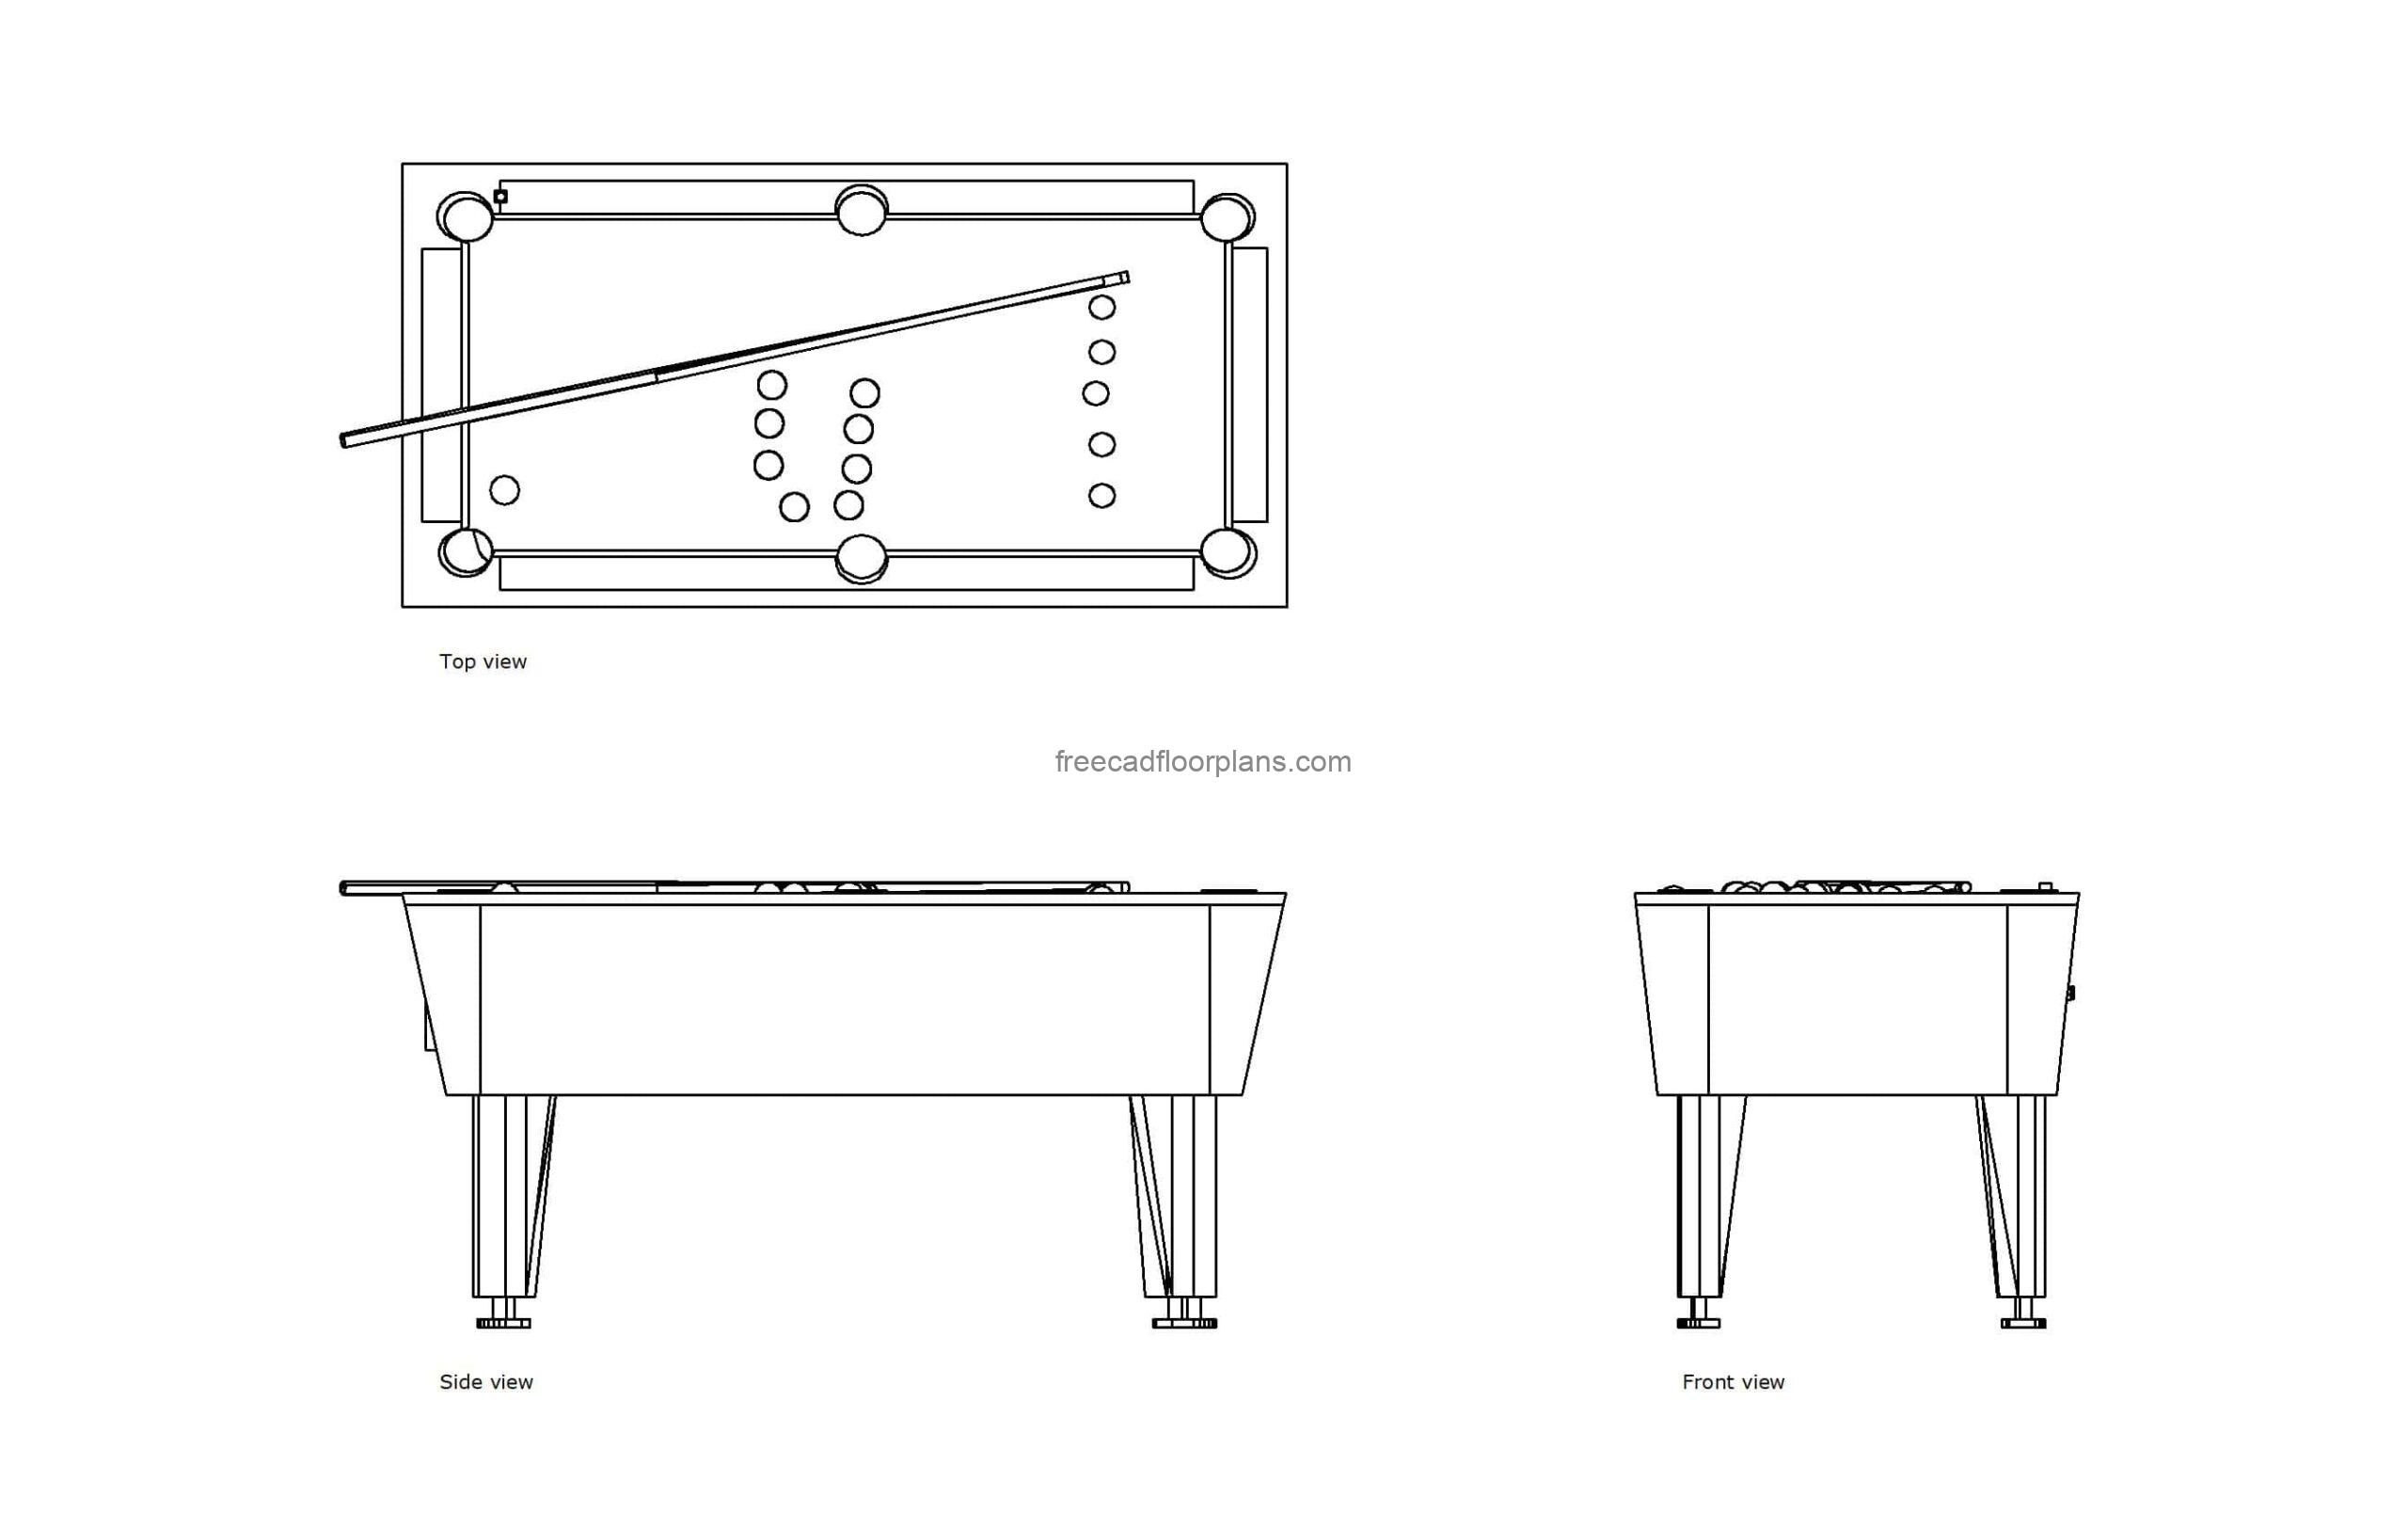 autocad drawing ofa 7ft pool table, 2d plan and elevation views, dwg file free for download